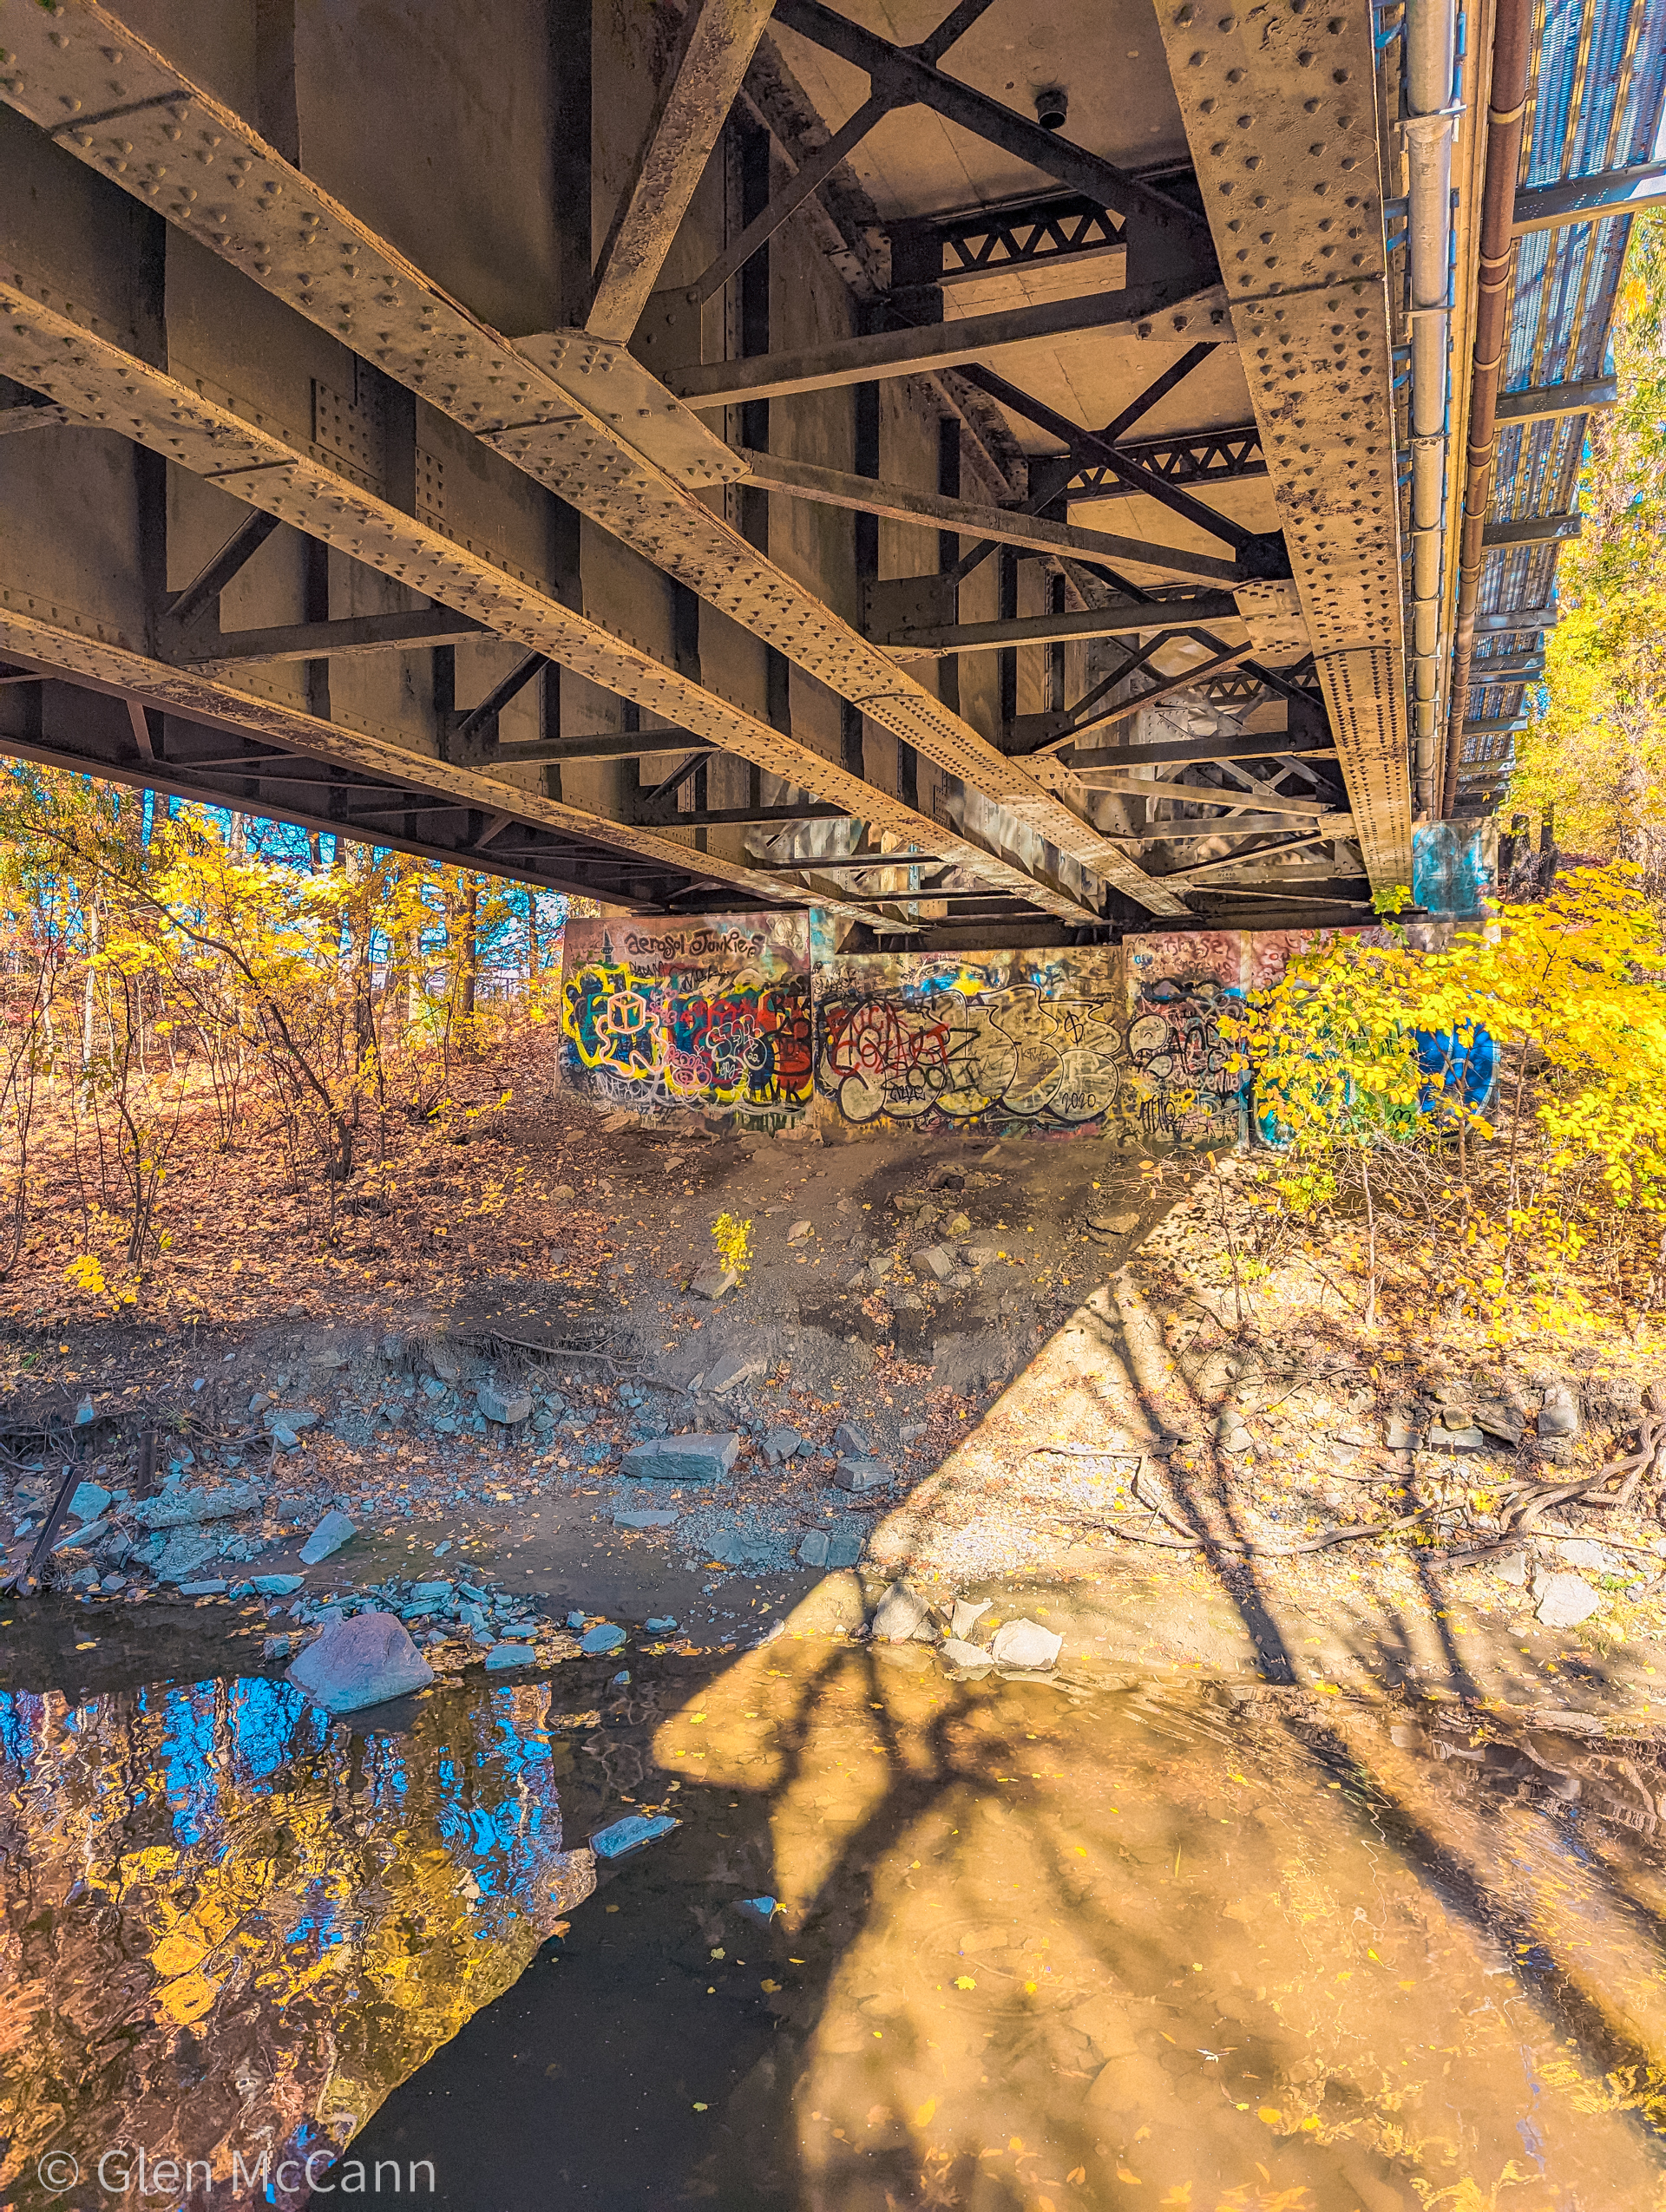 Photo of the underside of a bridge featuring colourful graffiti and foliage.